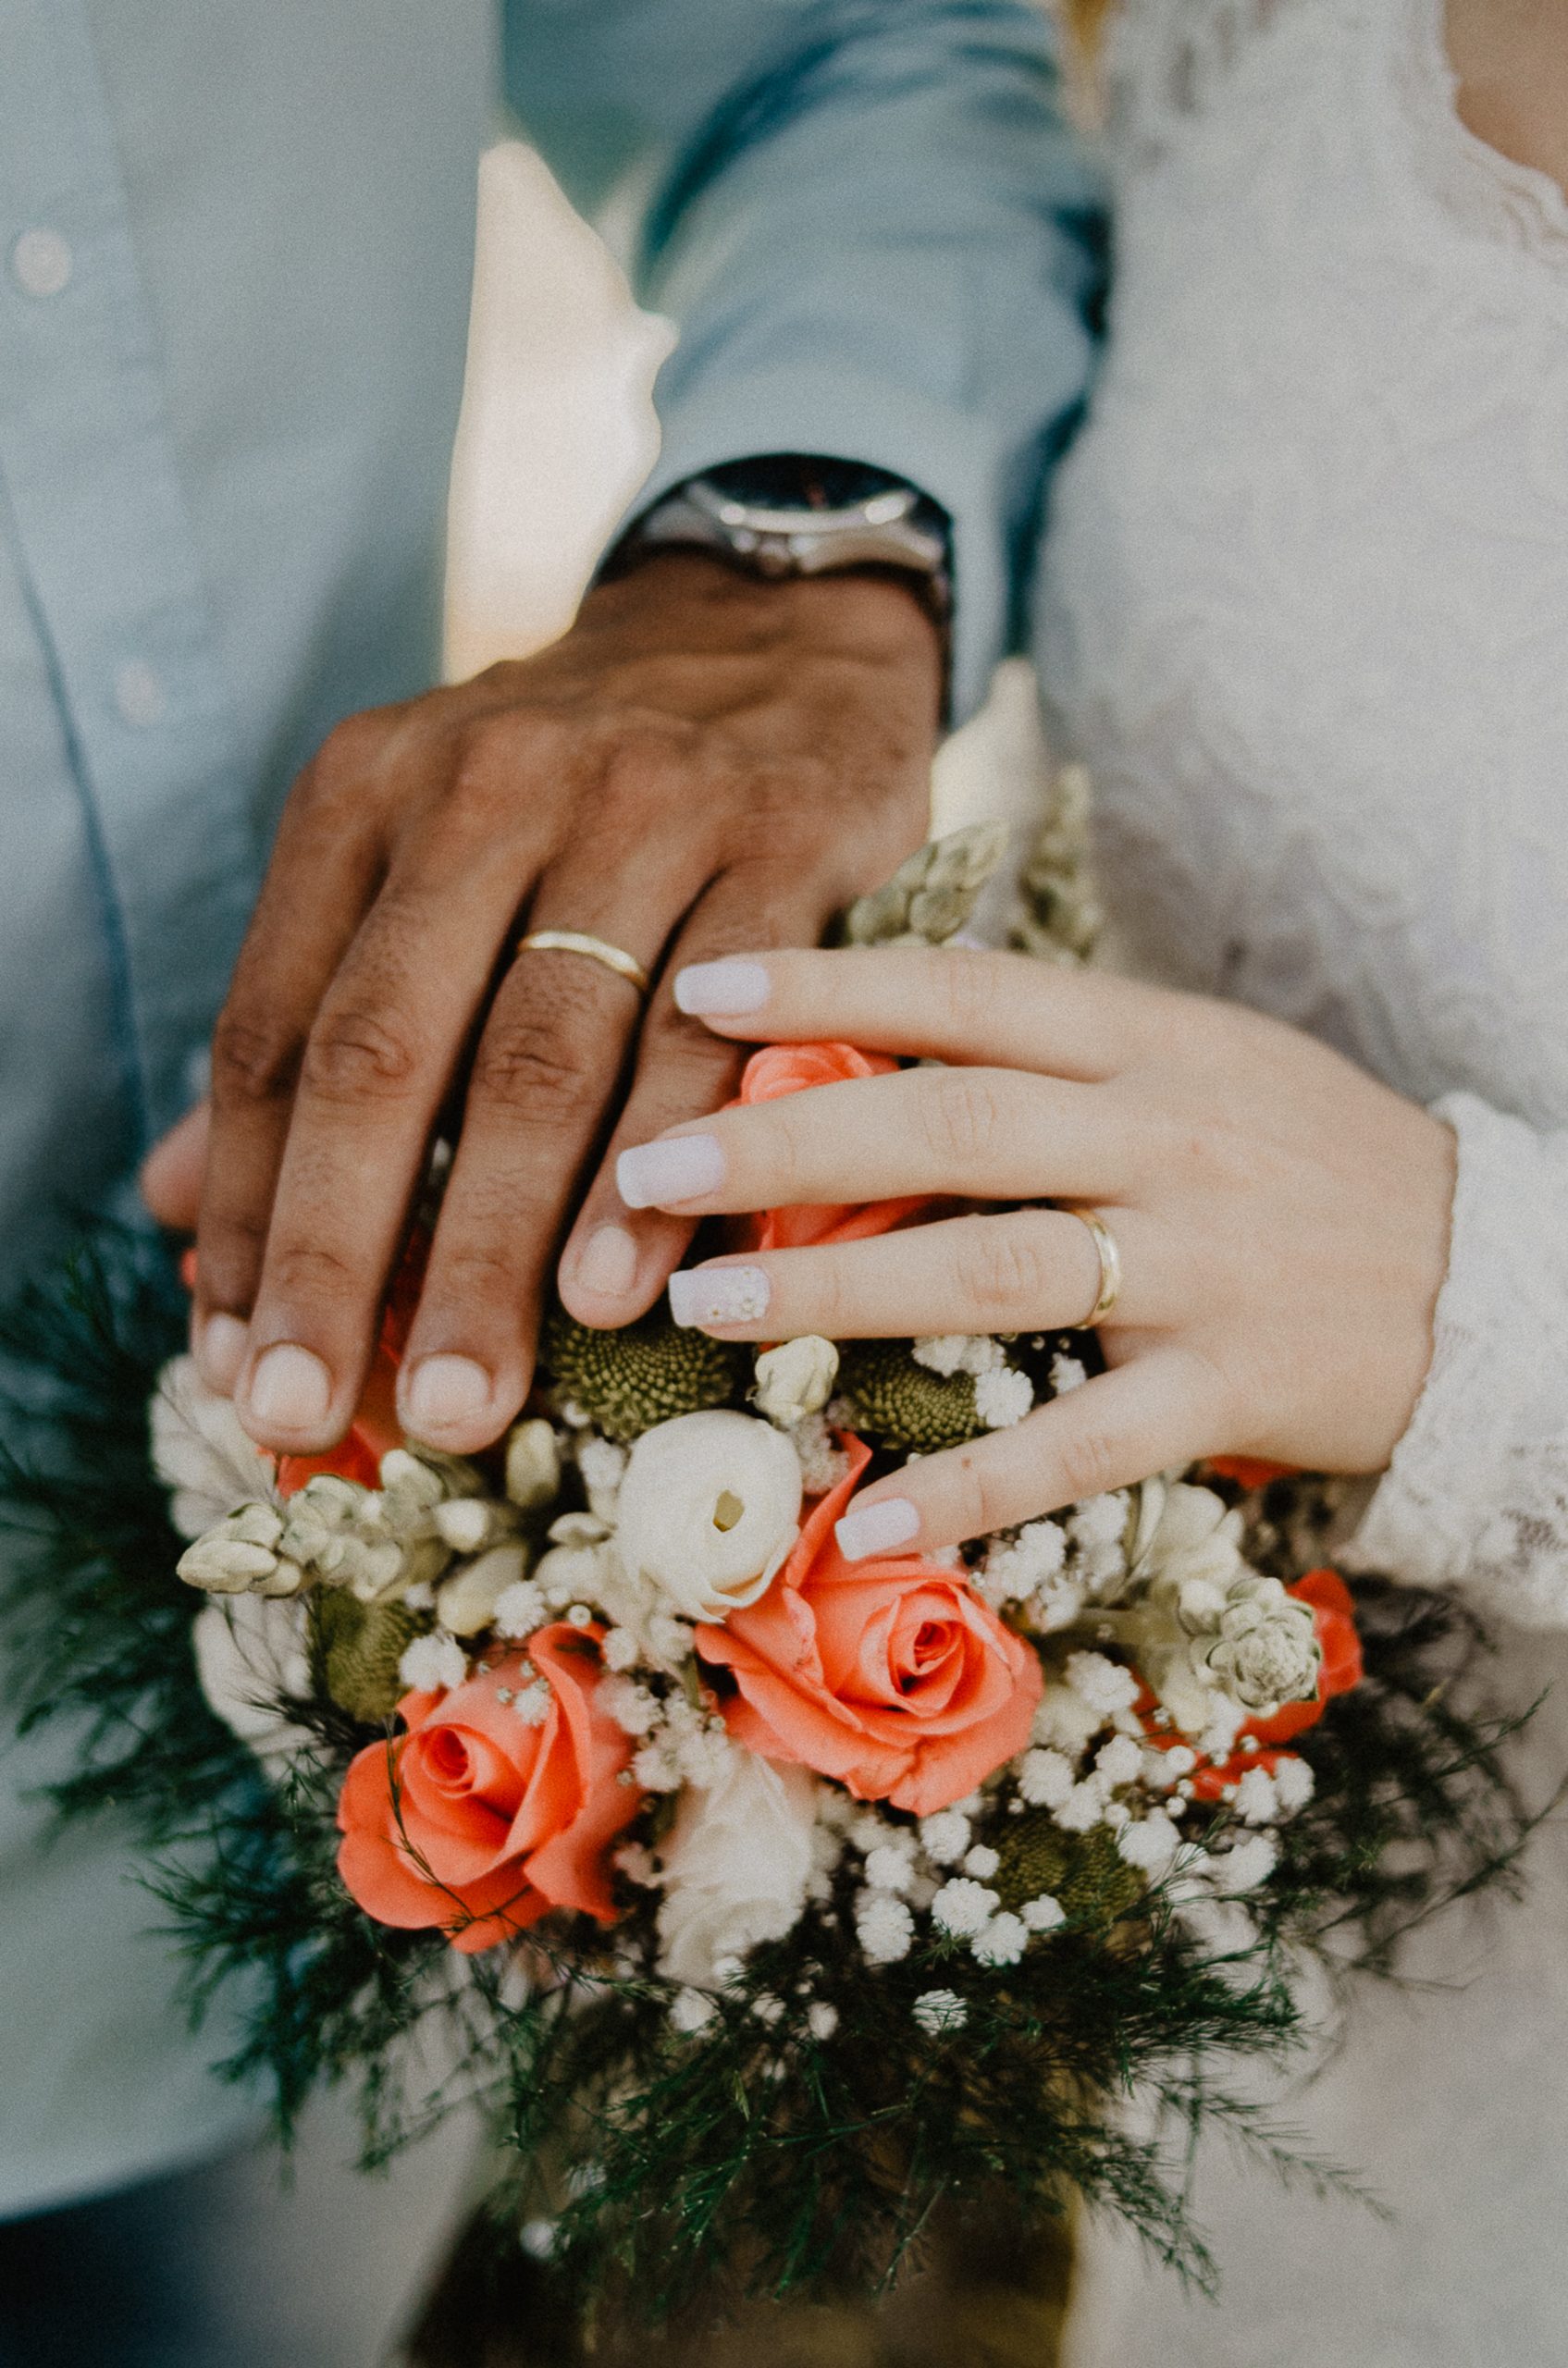 Man and woman s hands on top of ball bouquet